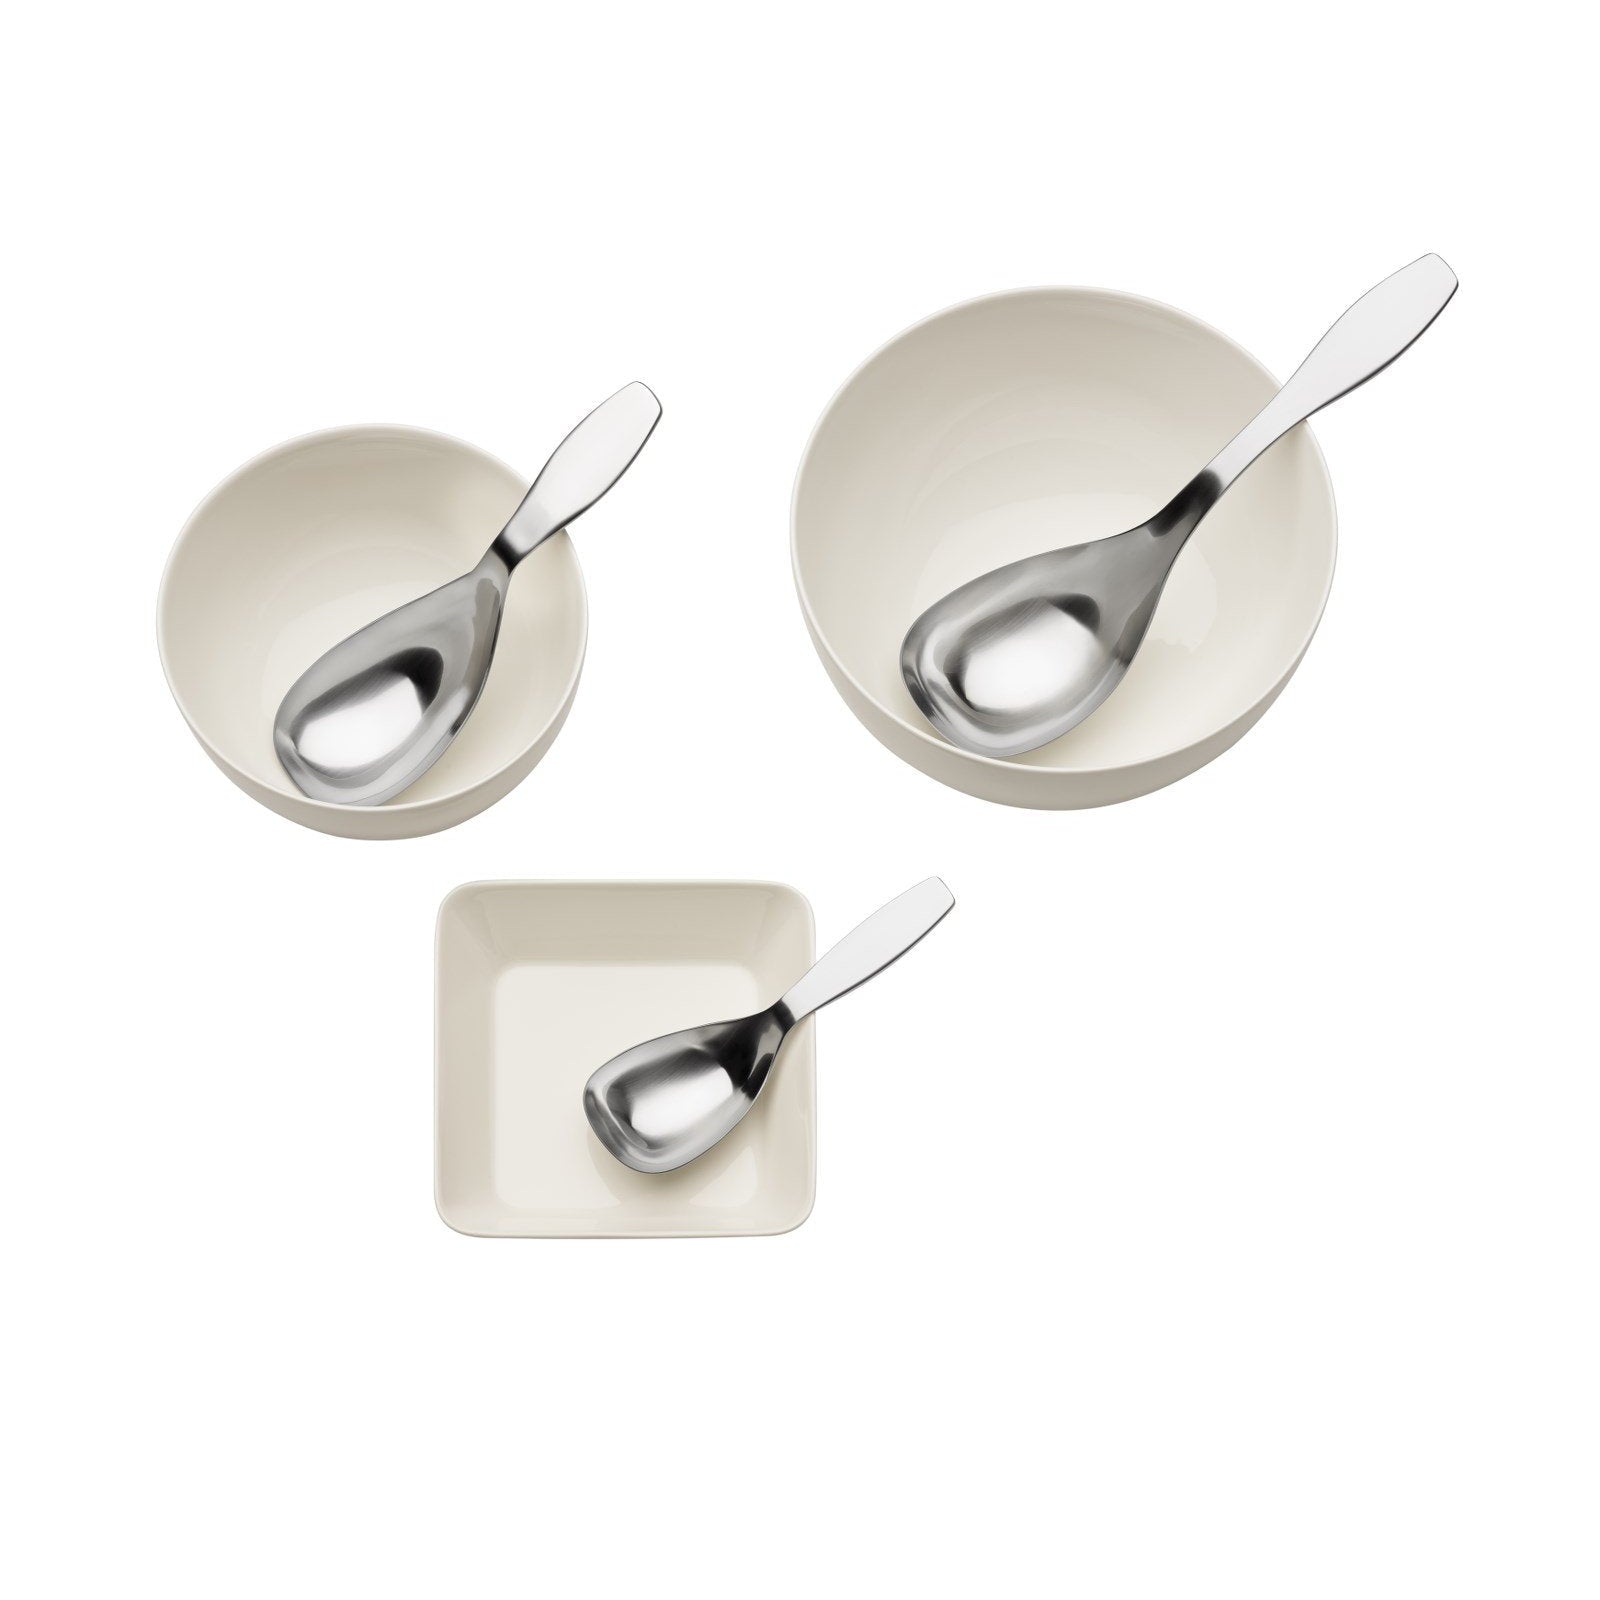 Iittala Outils collectifs servant une cuillère, petite